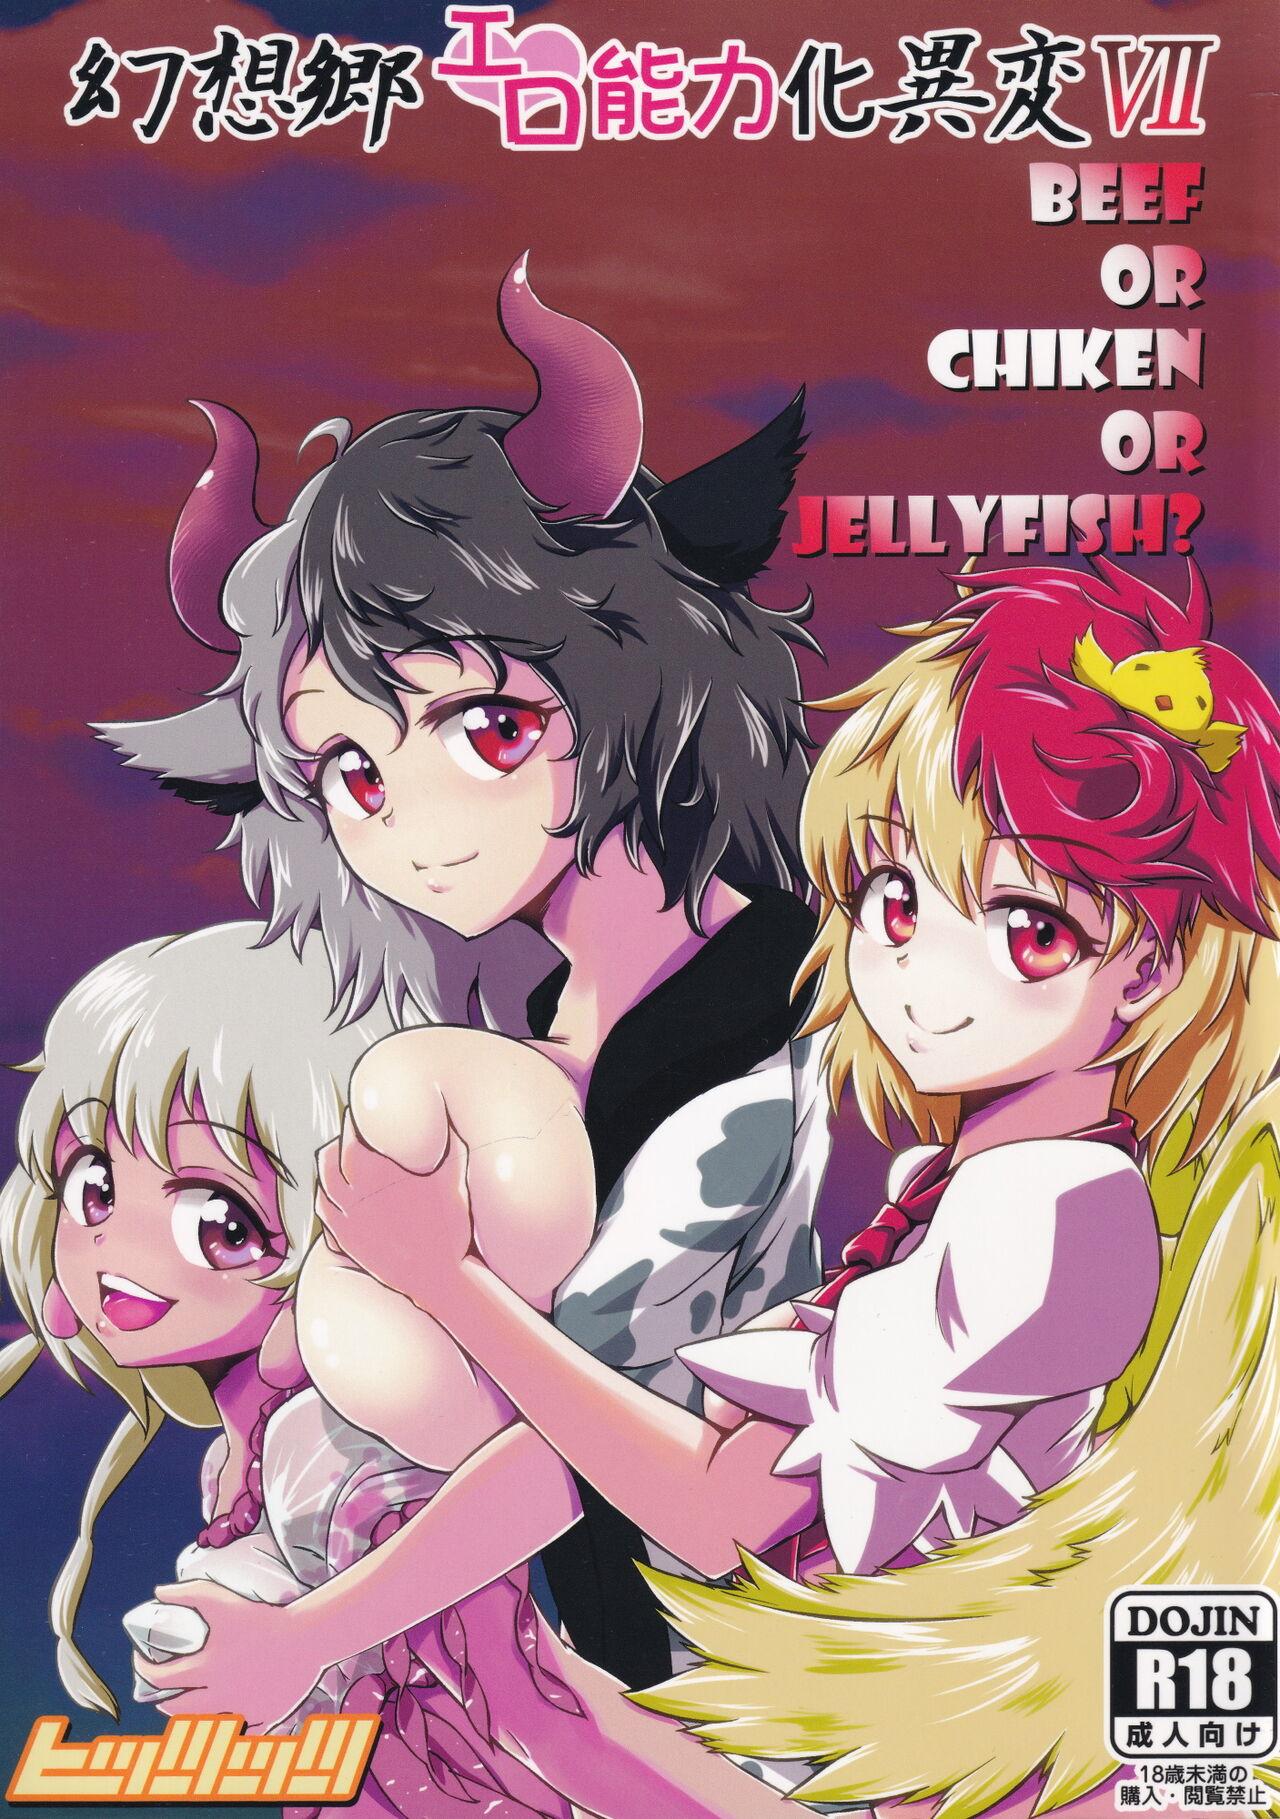 Shavedpussy Gensoukyou Ero Nouryoku-ka Ihen VII Beef or Chicken or Jellyfish? - Touhou project Cumshots - Picture 1